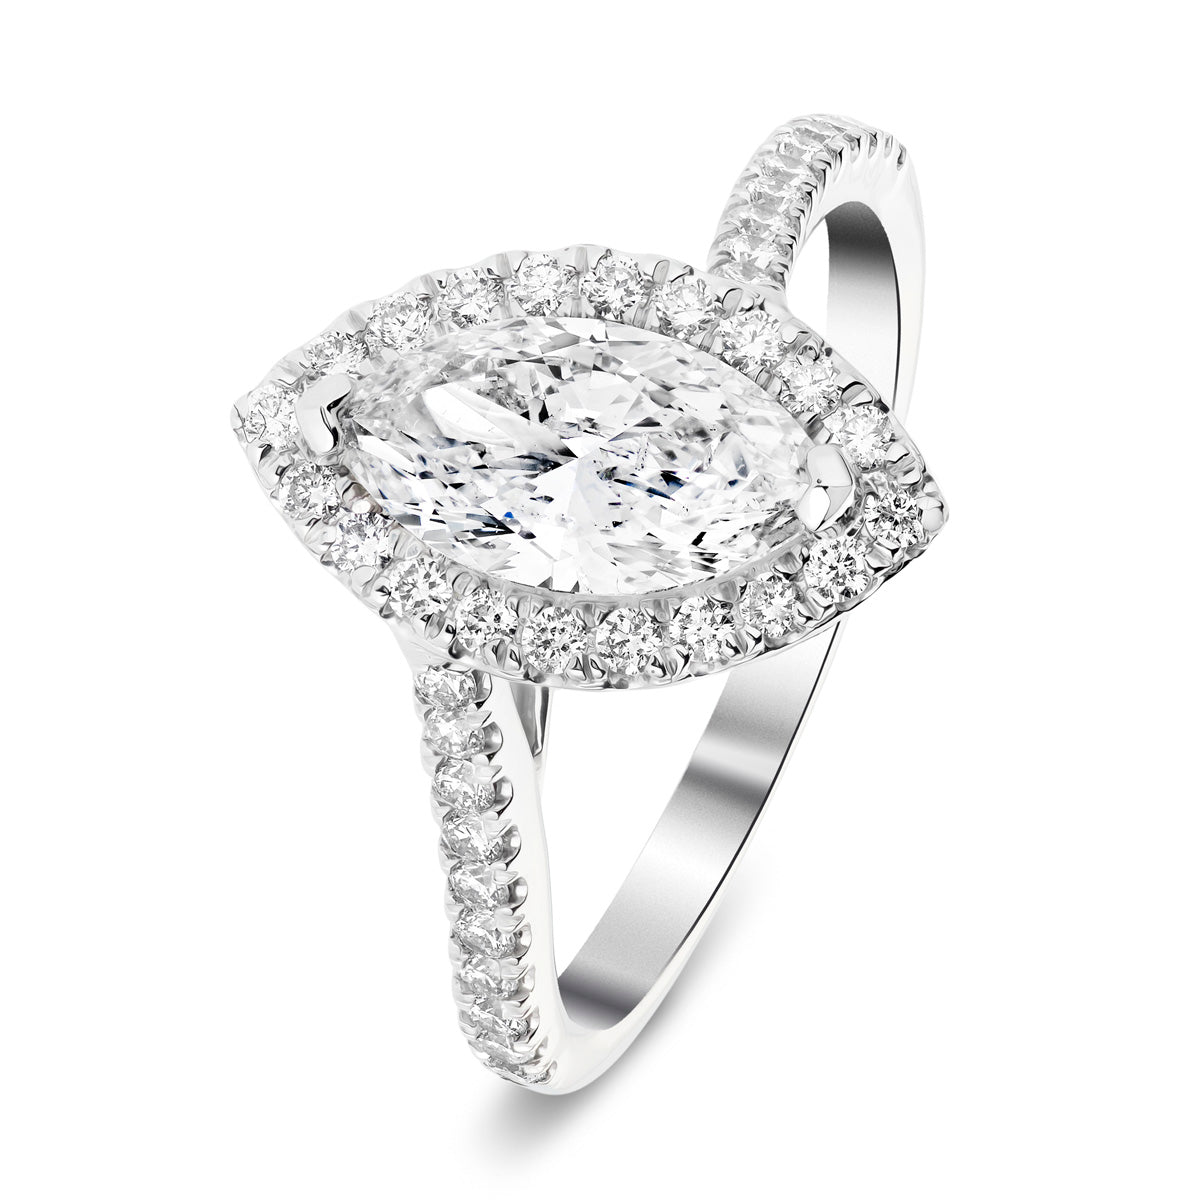 Certified Twist Marquise Diamond Halo Engagement Ring 0.85ct E/VS in 18k White Gold - All Diamond